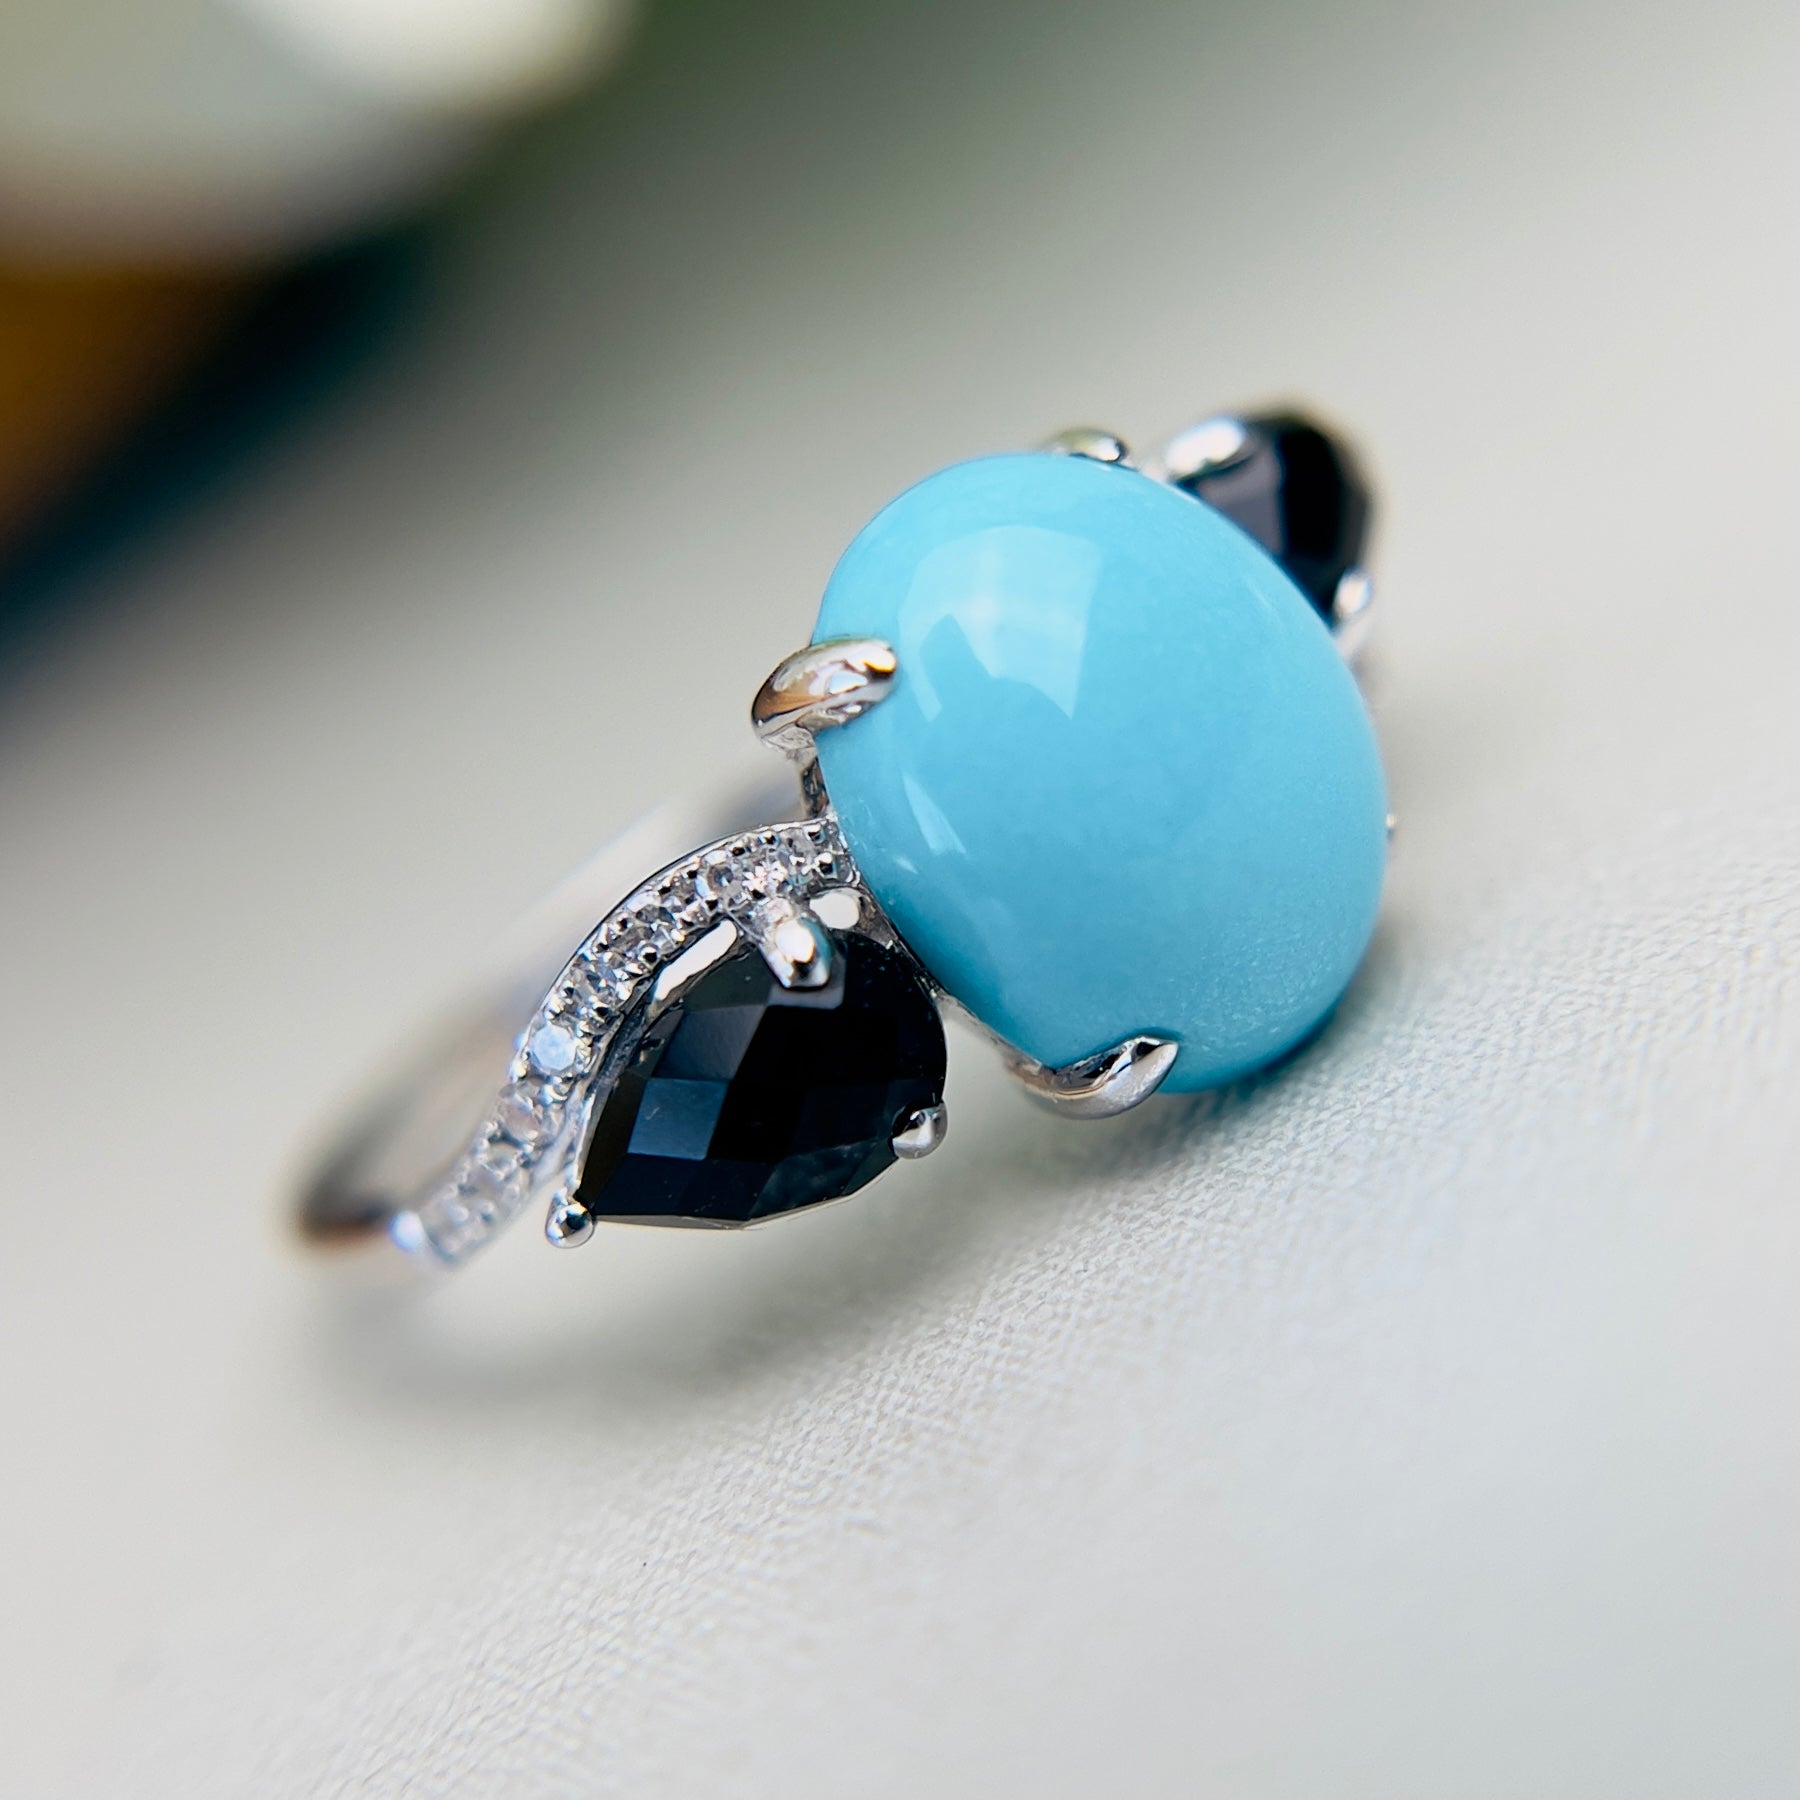 Georland diamonds, onyx, turquoise and gold ring